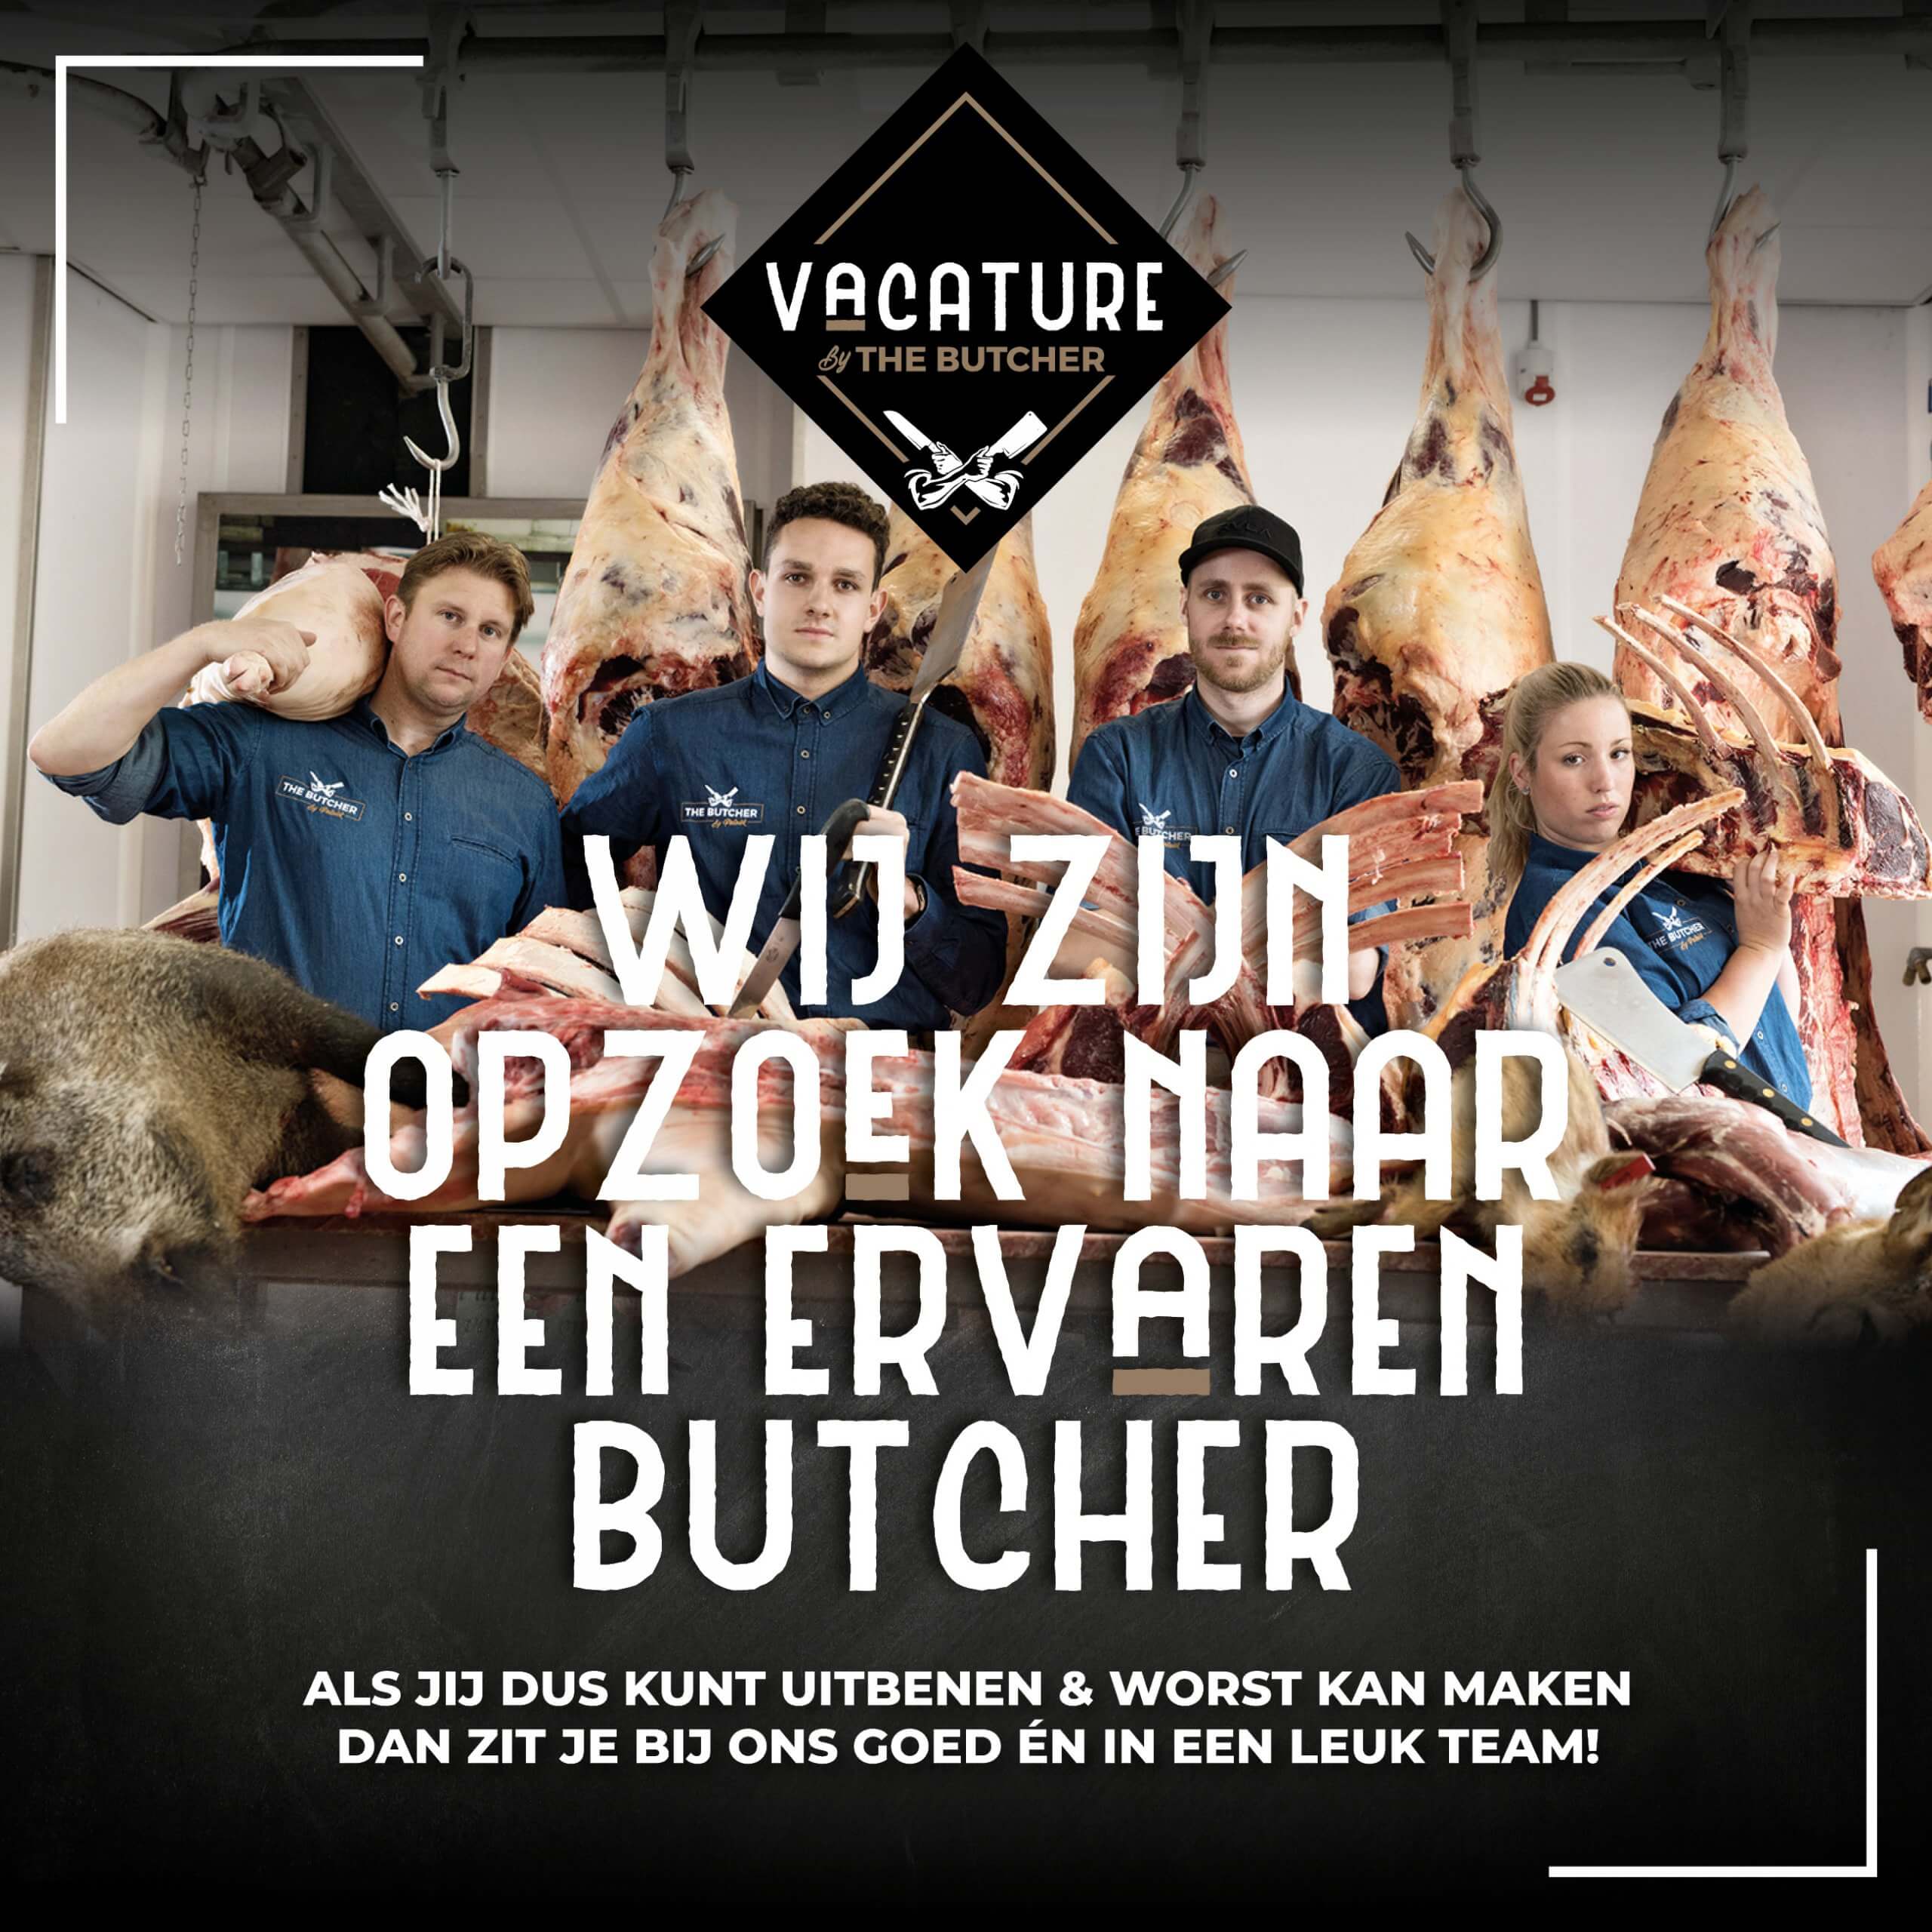 The Butcher vacature